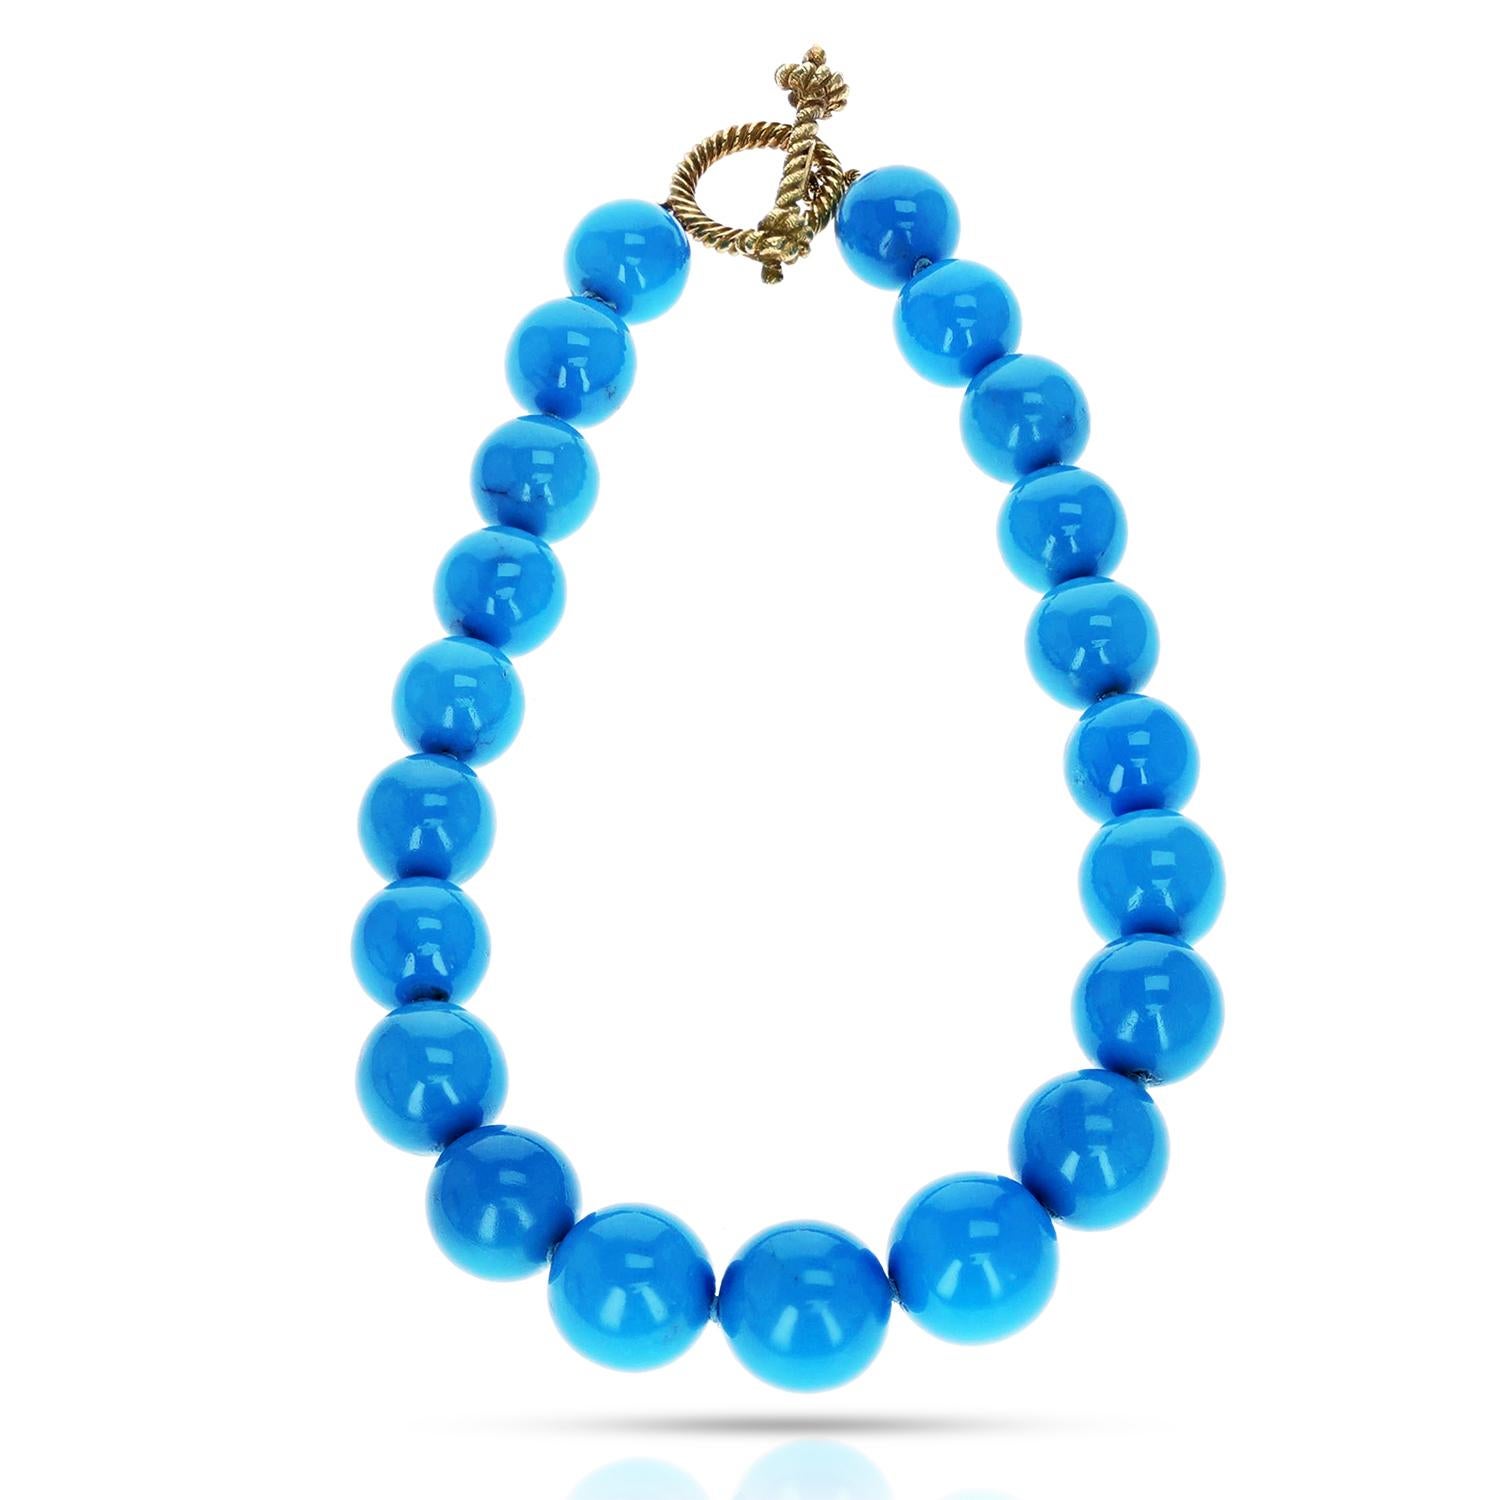 A GIA Certified Natural Turquoise Beads Necklace with 16 to 20 MM beads. The total length of the necklace is 16.75 inches and the total weight is 182.60 grams. The necklace has a toggle clasp in gold signed MISH NY 750 for 18 karat gold.